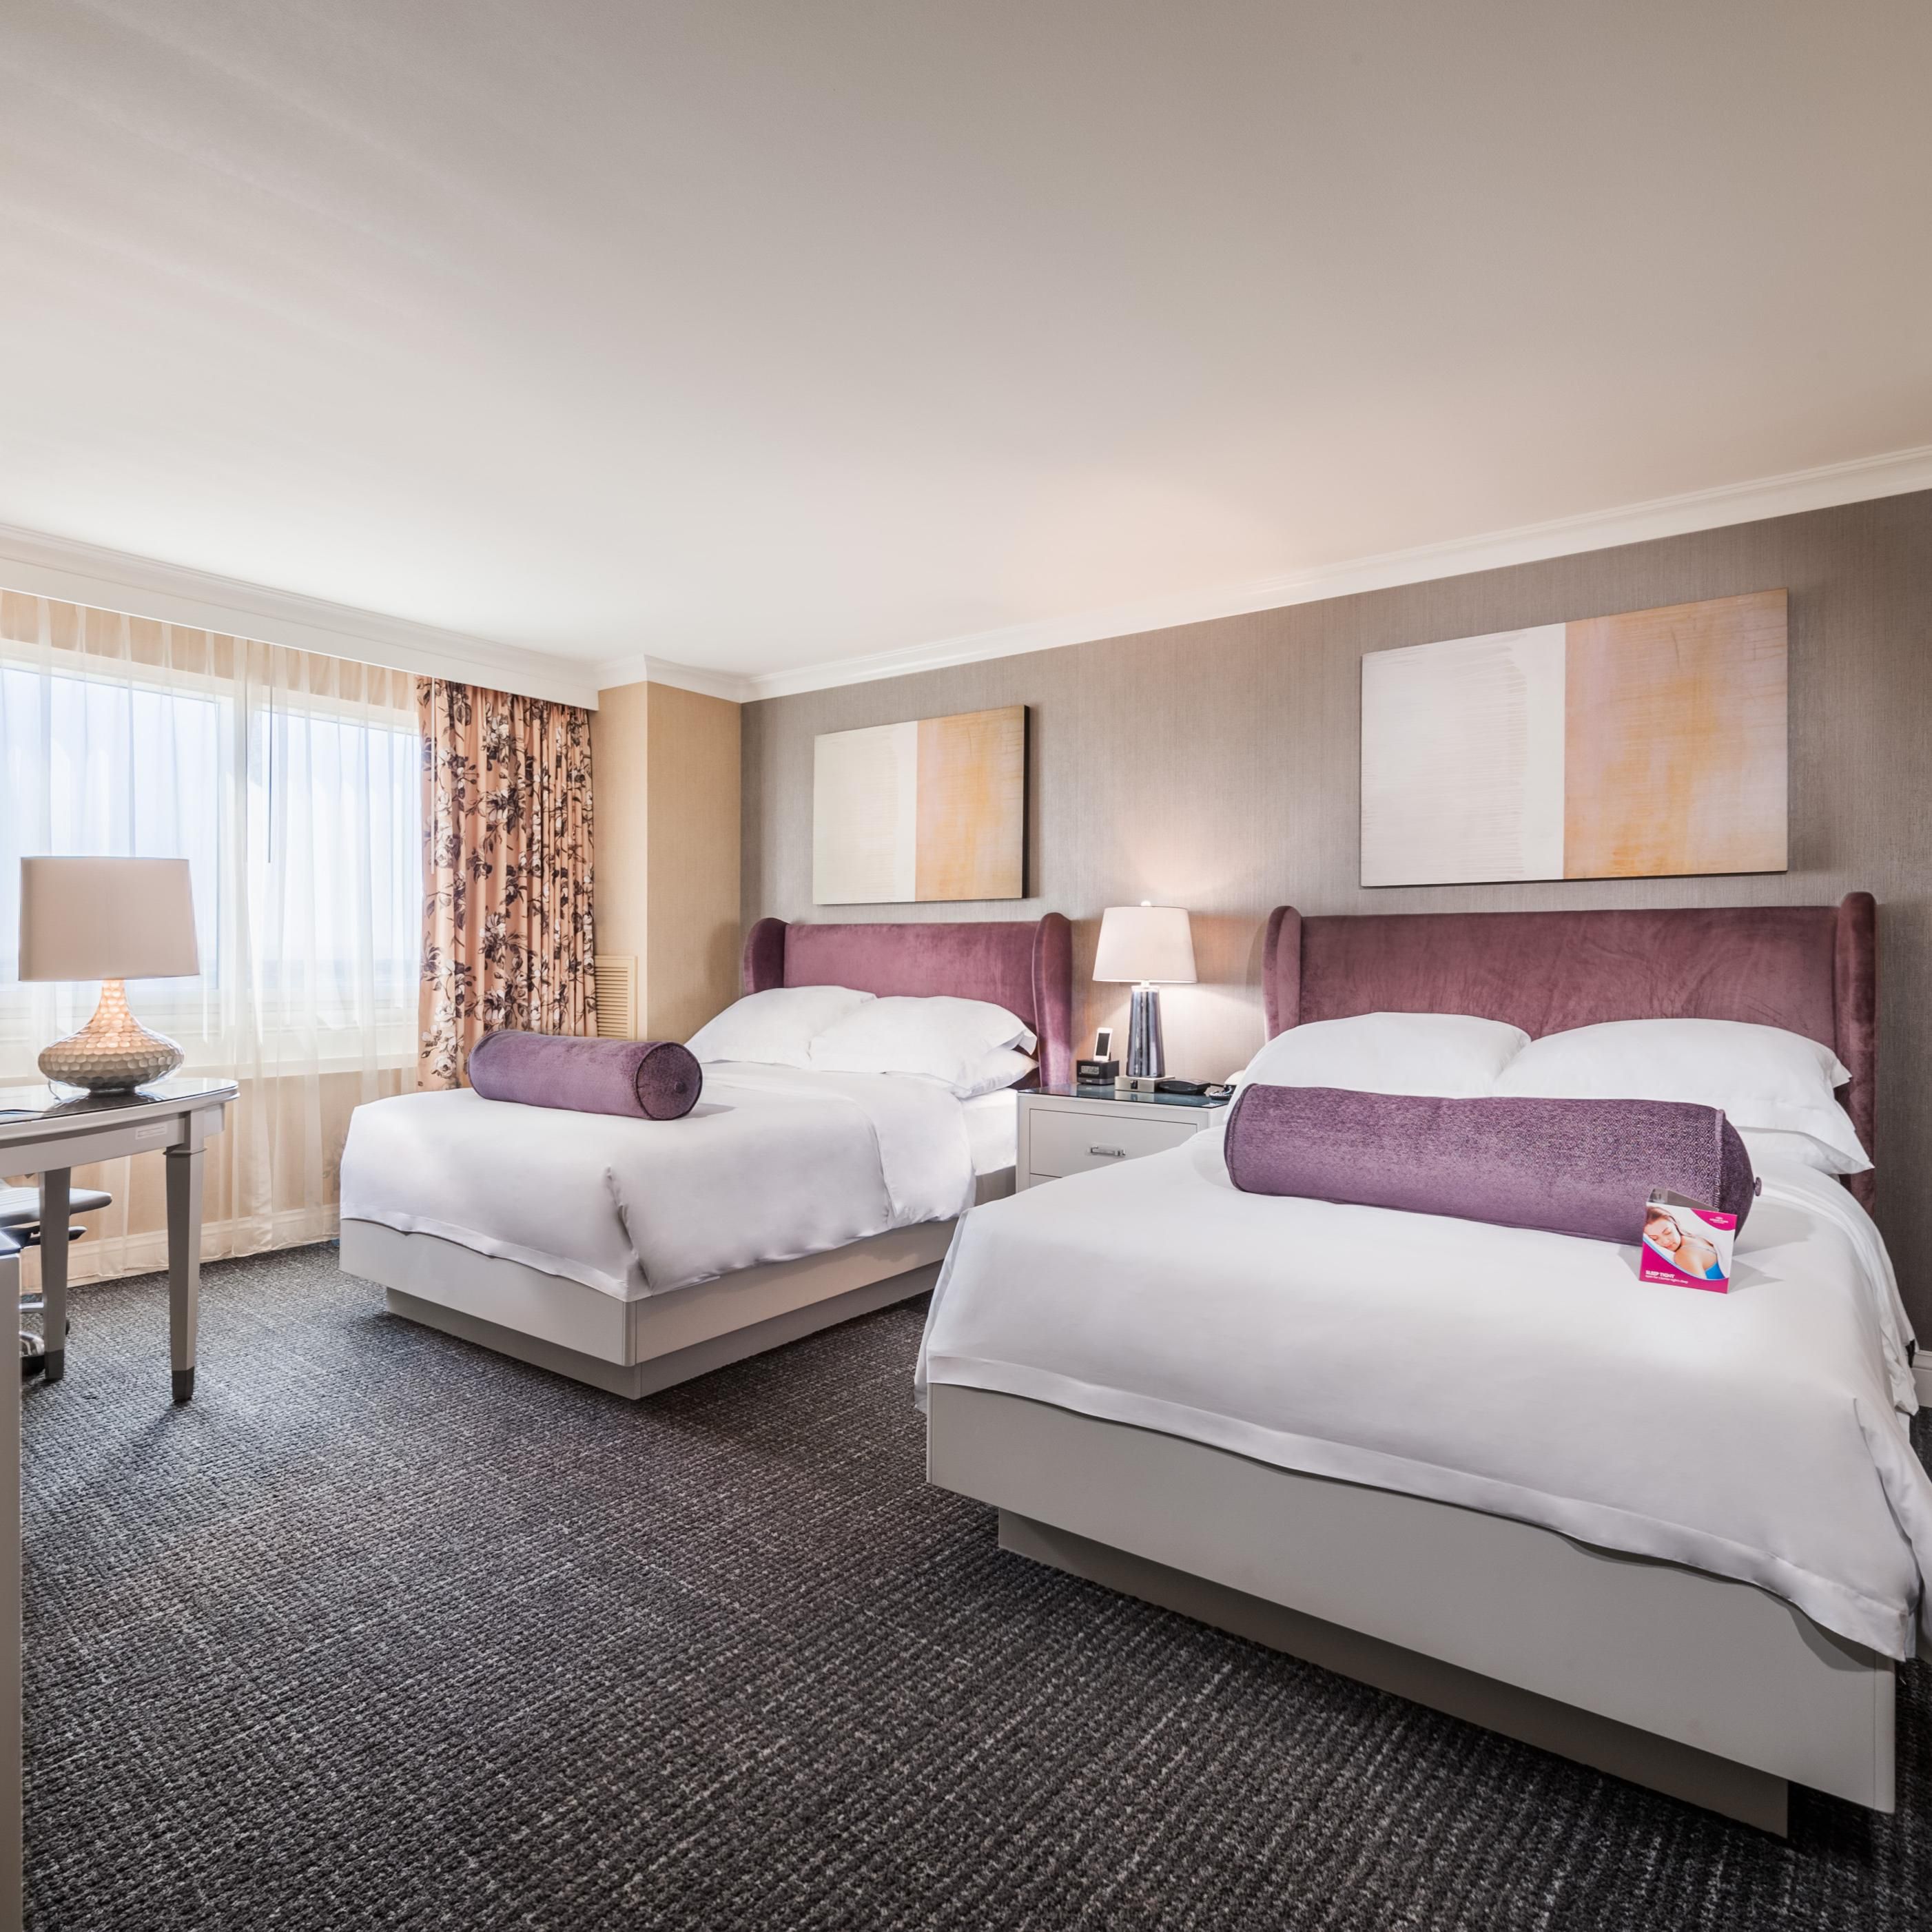 The perfect fit for your family, stay in the executive double room